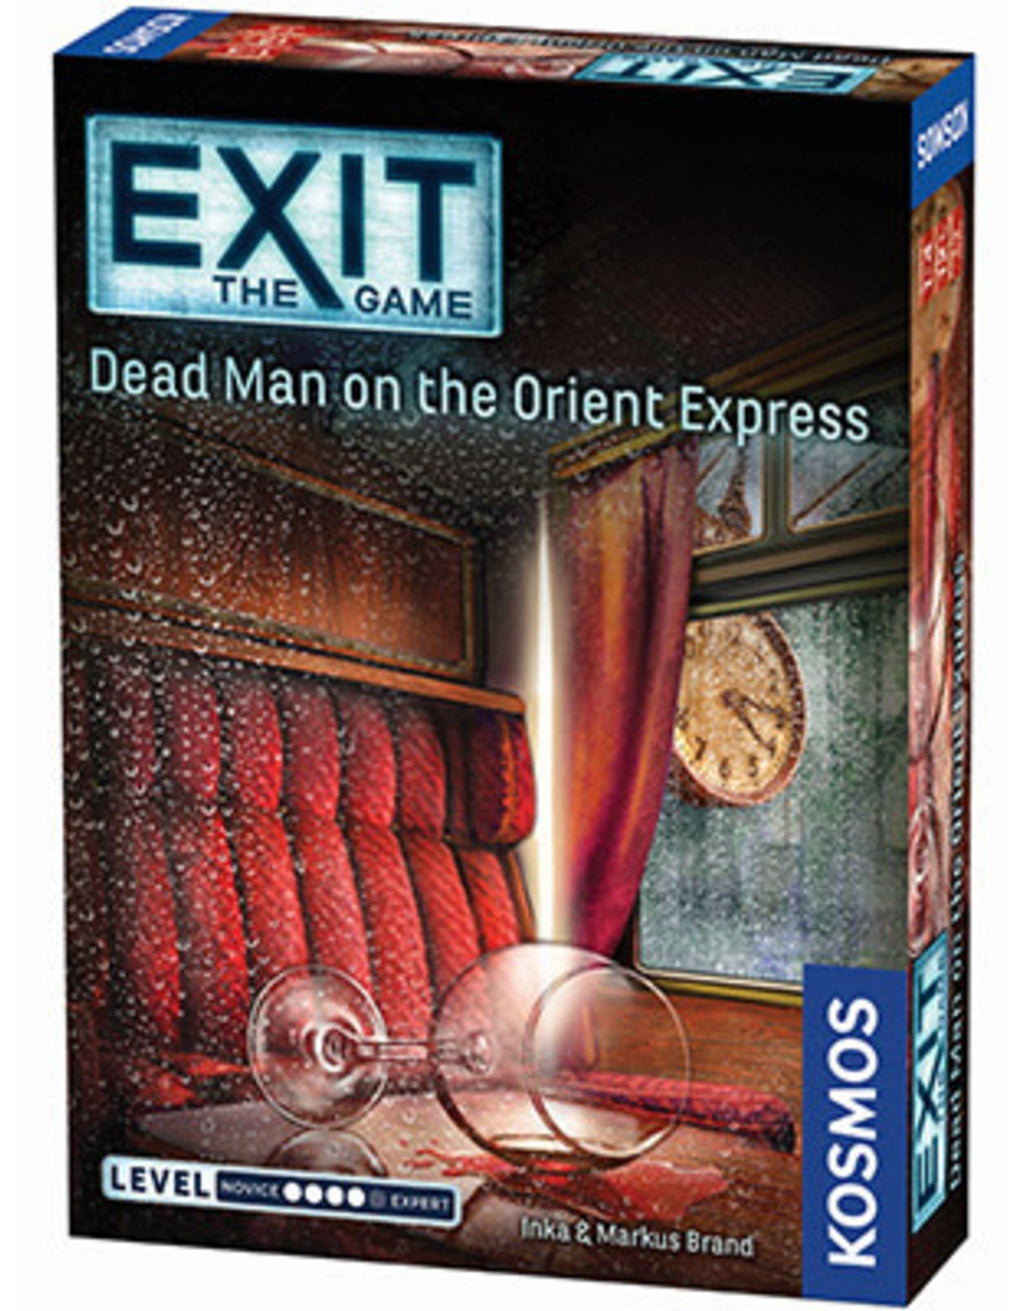 Exit The Game - Dead Man